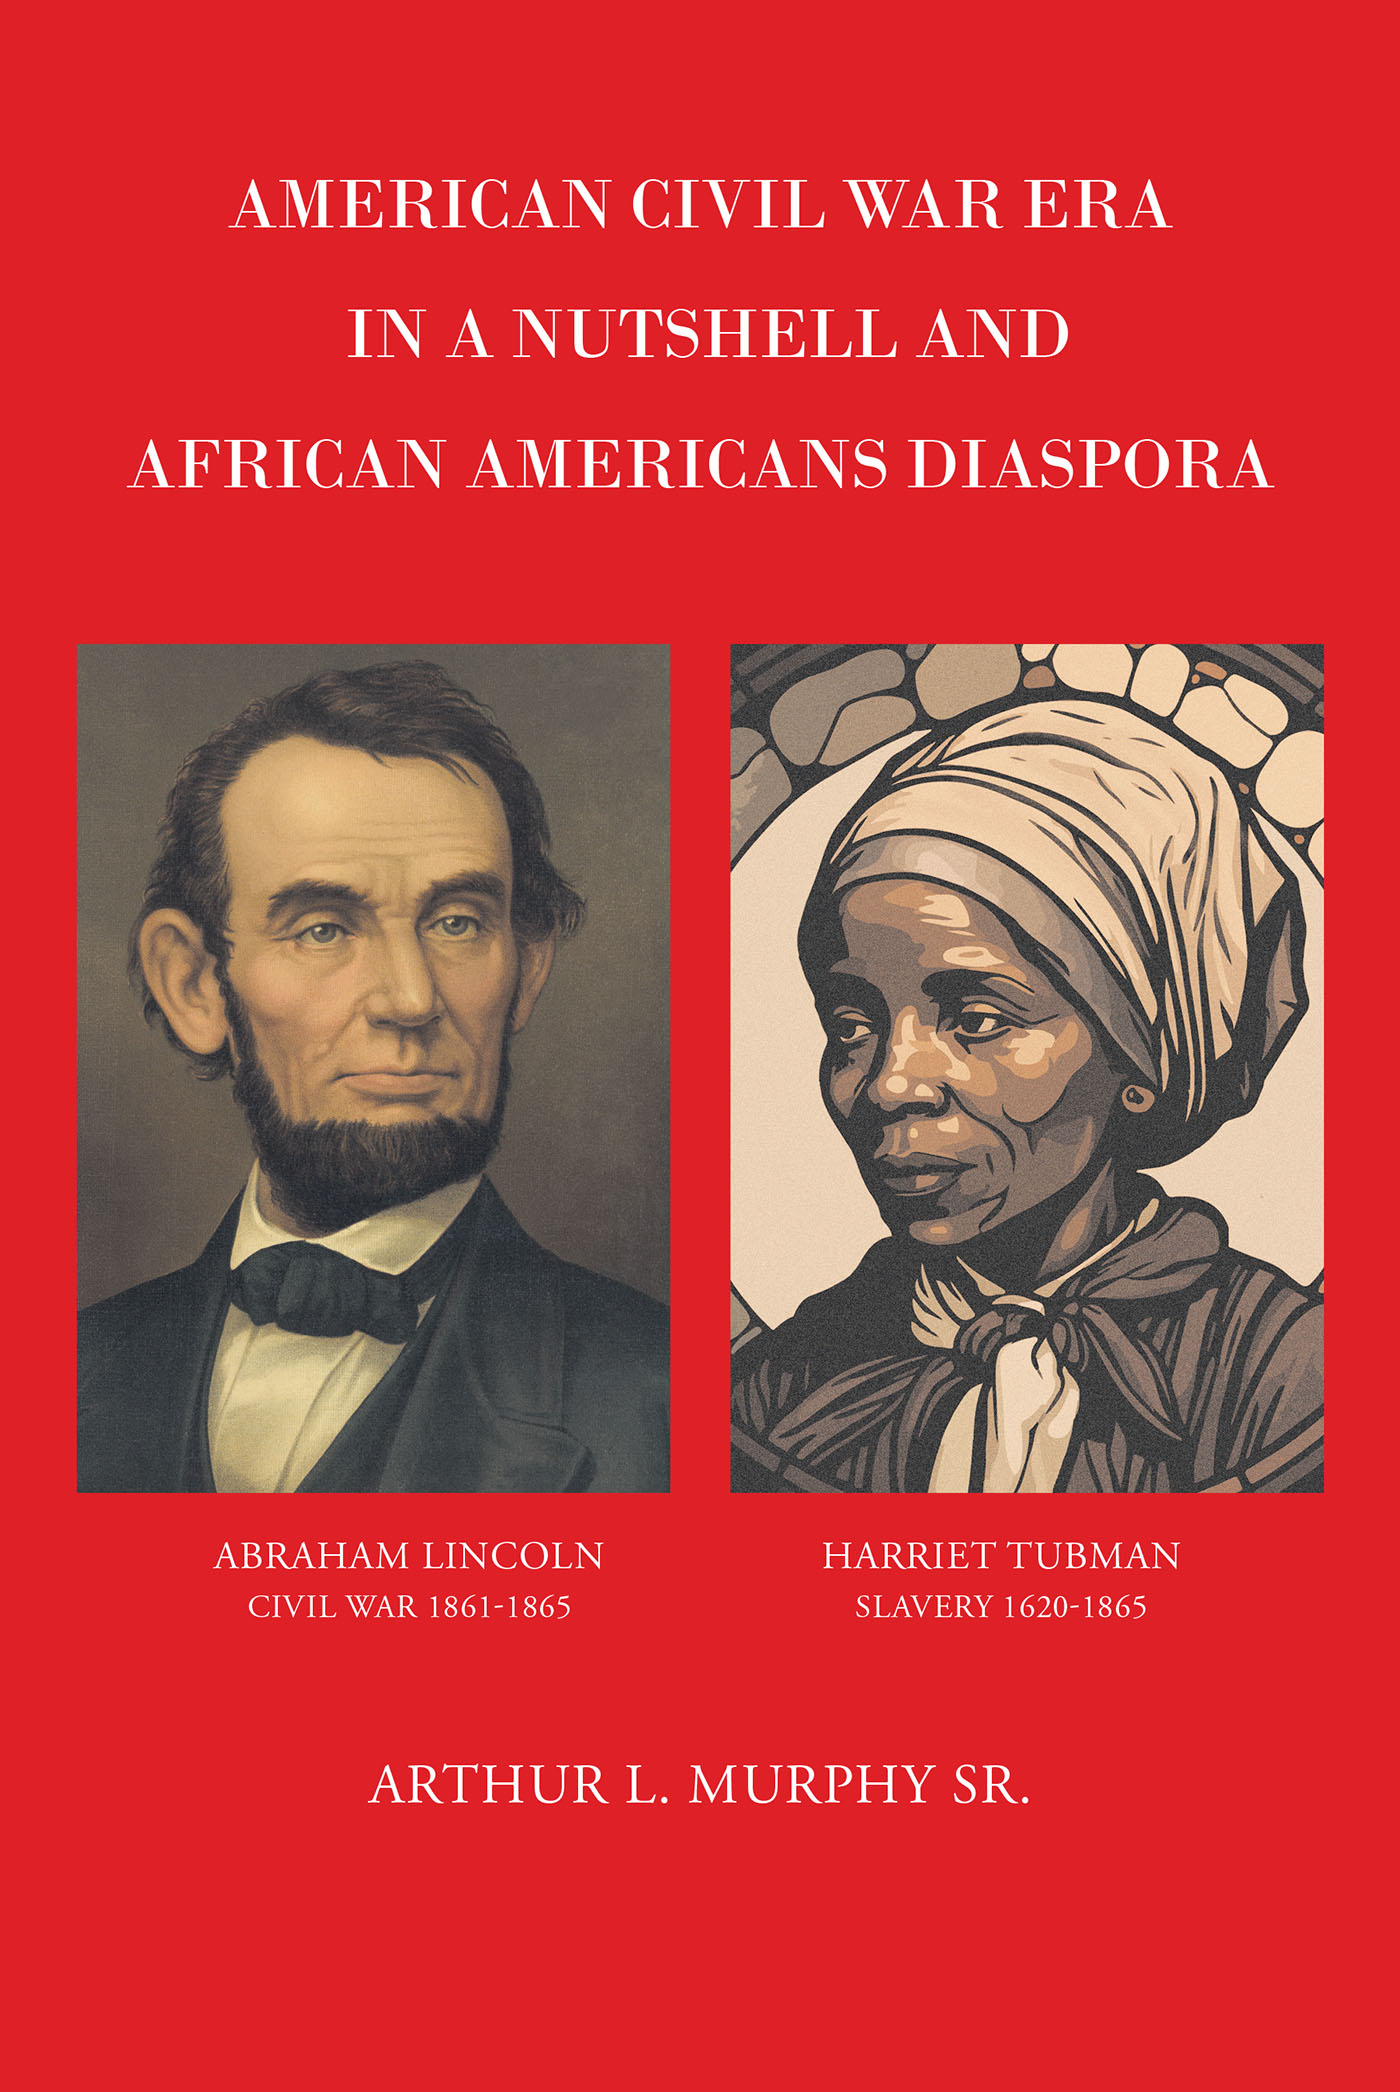 Arthur L. Murphy Sr.’s New Book, “American Civil War Era in a Nutshell and African Americans Diaspora,” is a Fascinating History of African Americans’ Impact on Warfare